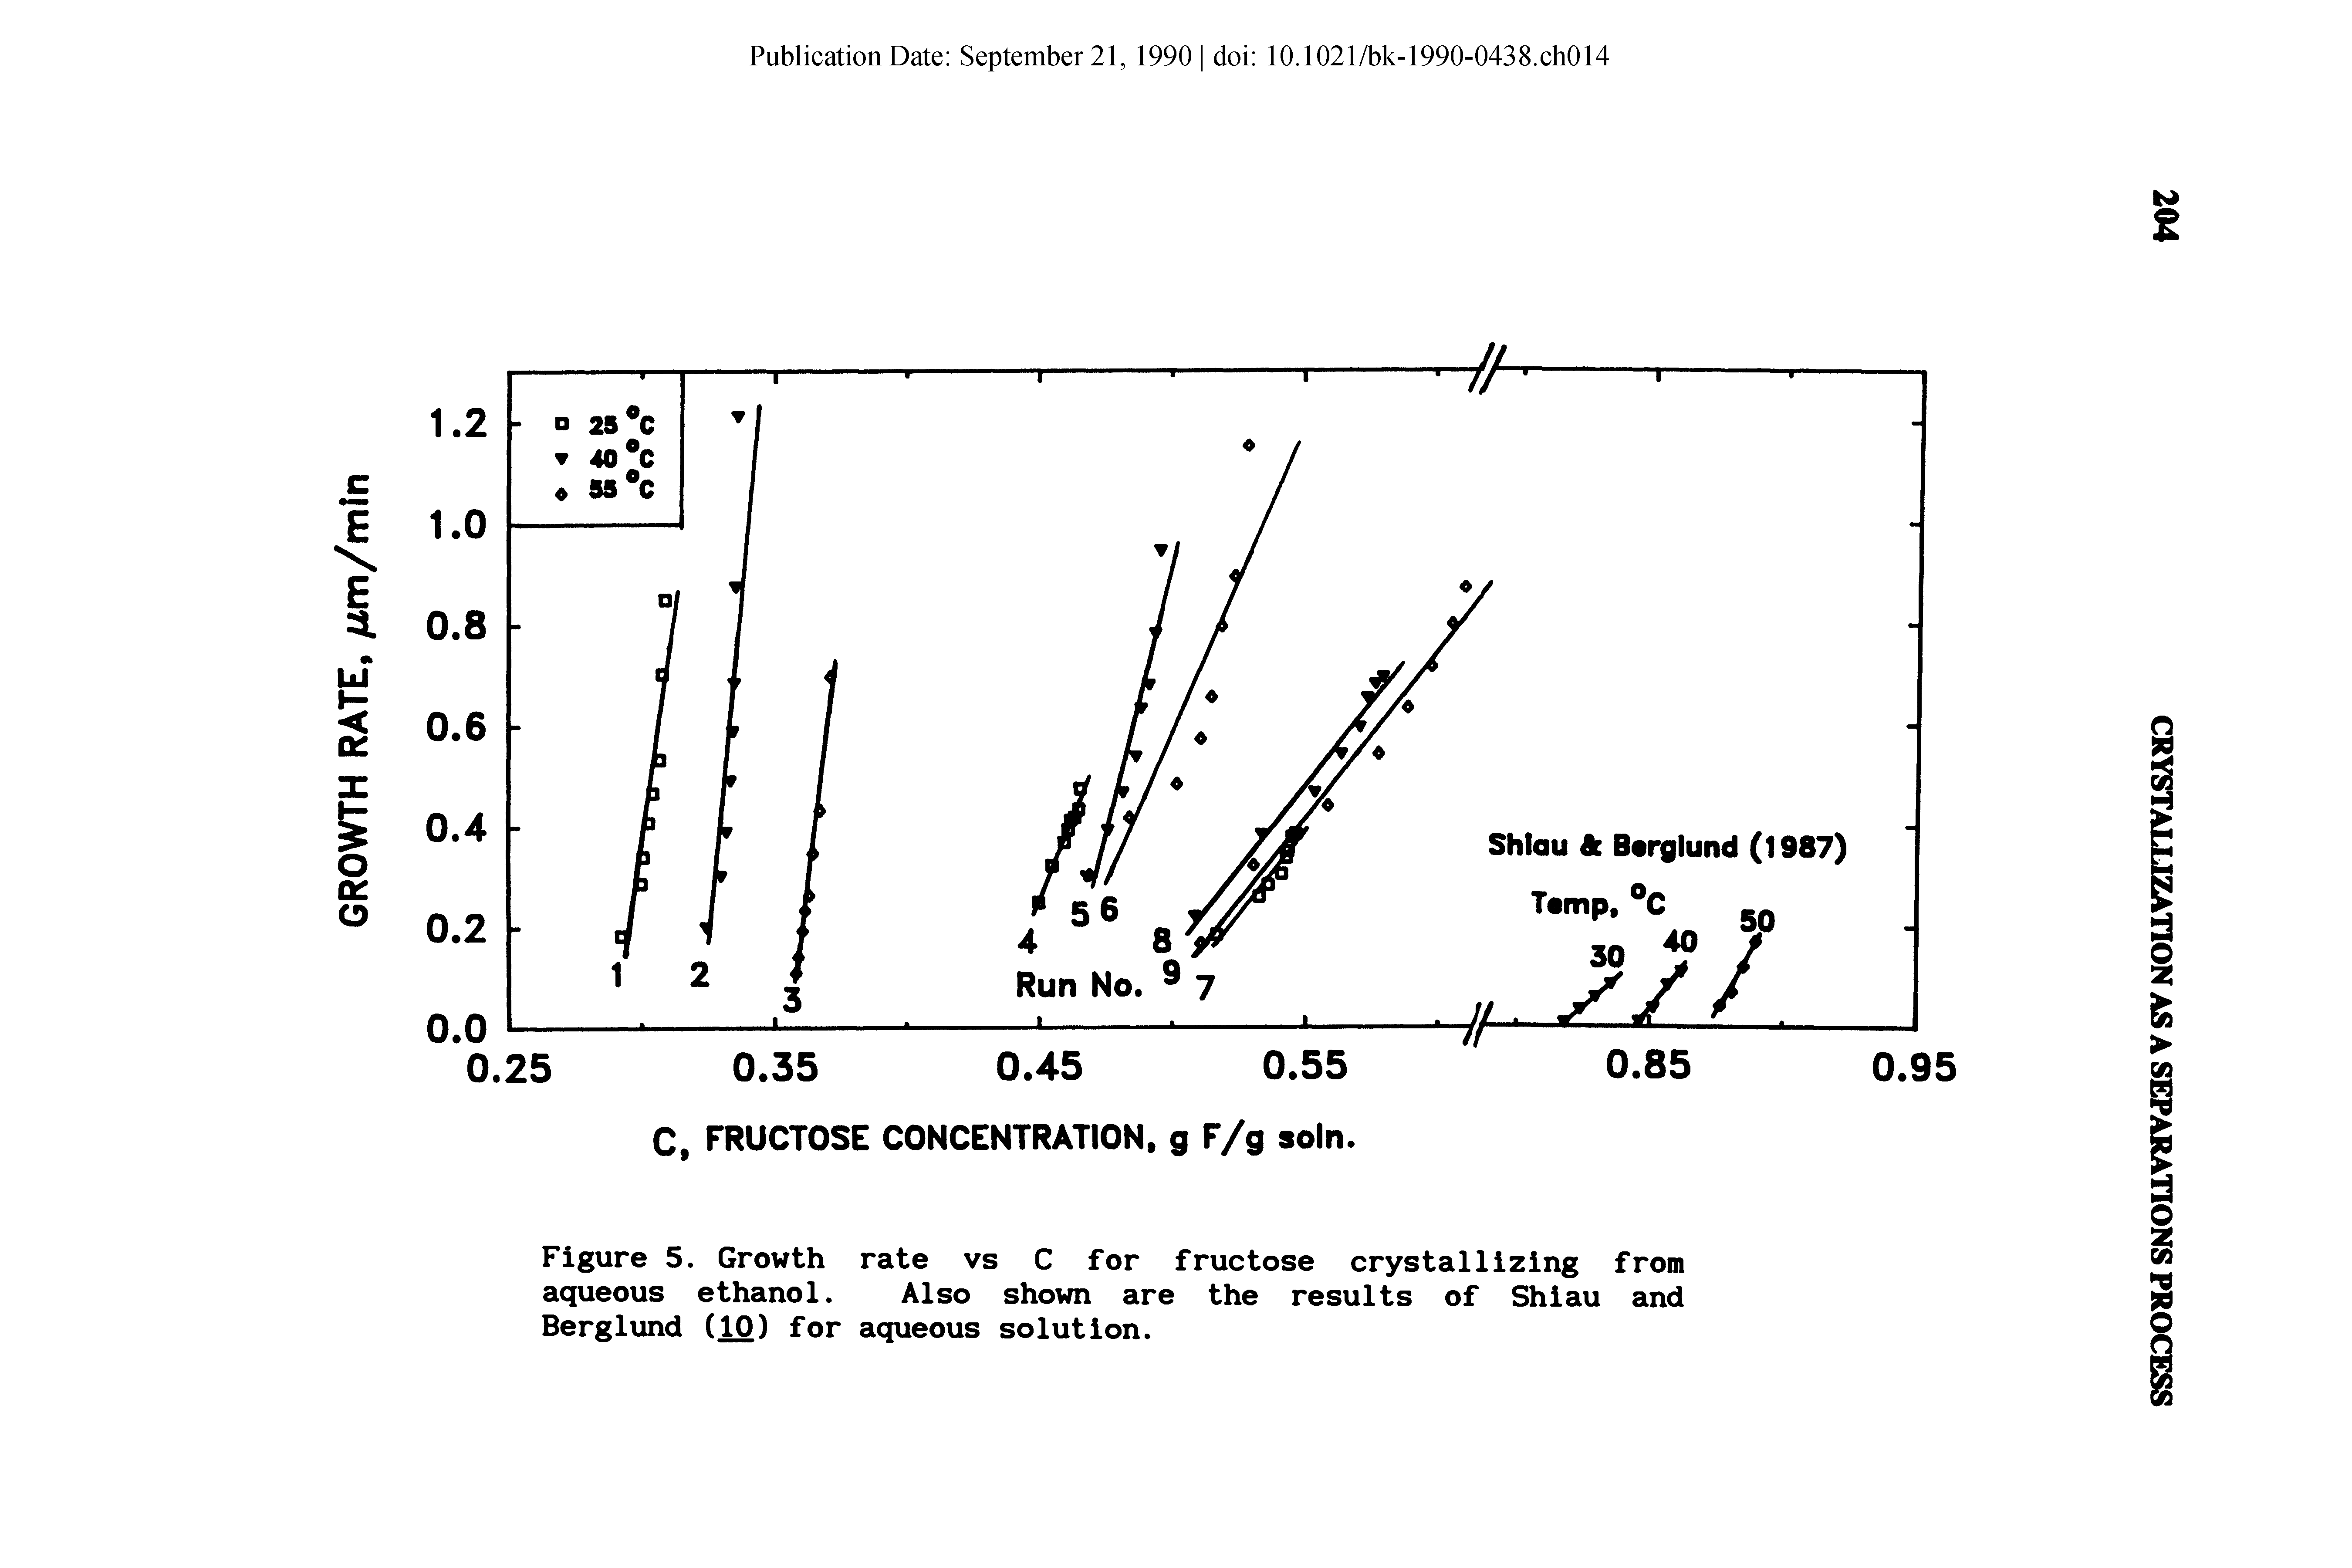 Figure 5. Growth rate vs C for fructose crystallizing from aqueous ethanol. Also shown are the results of Shiau and Berglund (10) for aqueous solution.